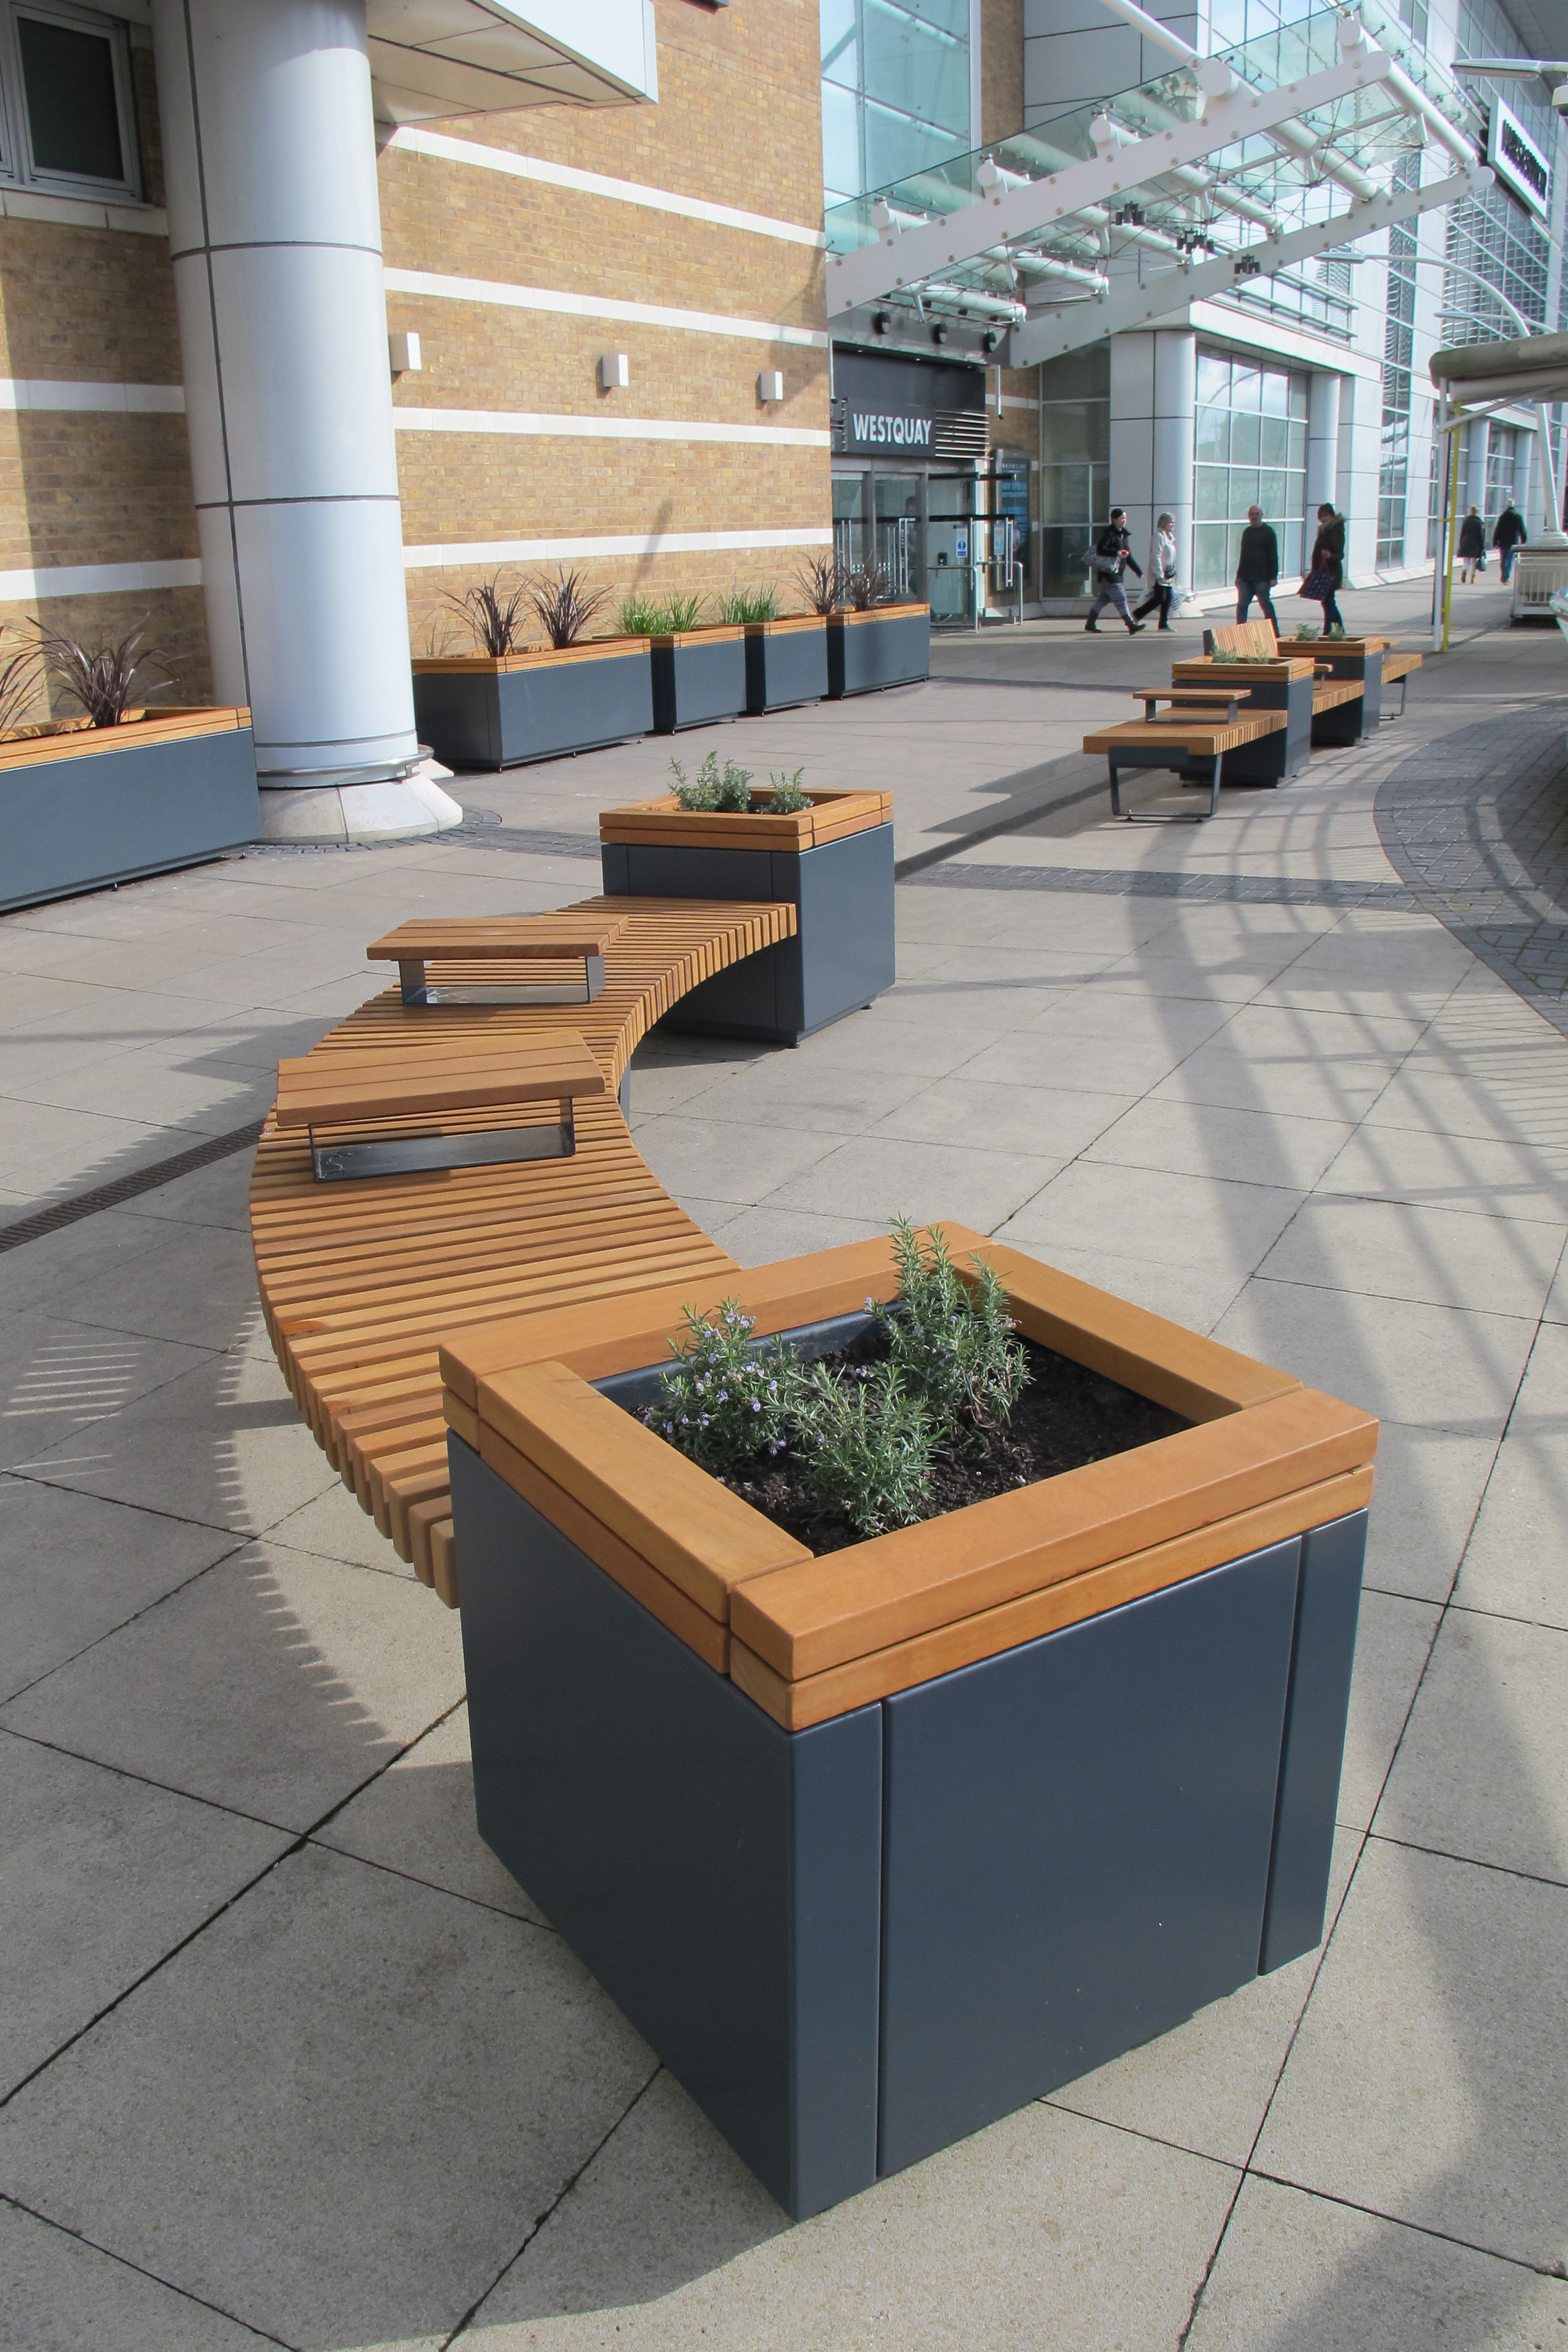 Modular solutions – Seating, planters, planter walling